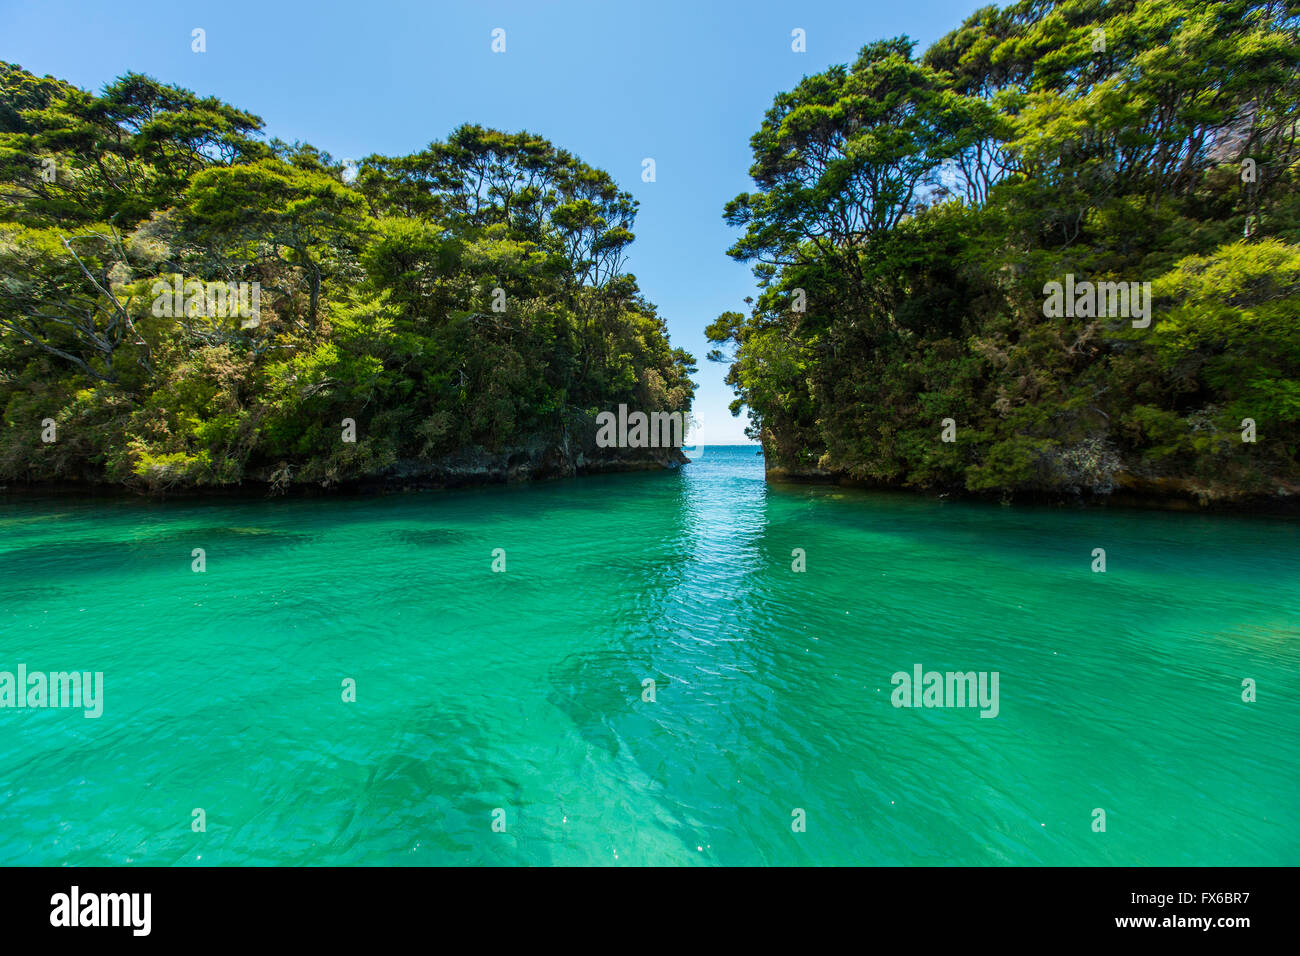 Sun over lush trees and remote ocean cove Stock Photo